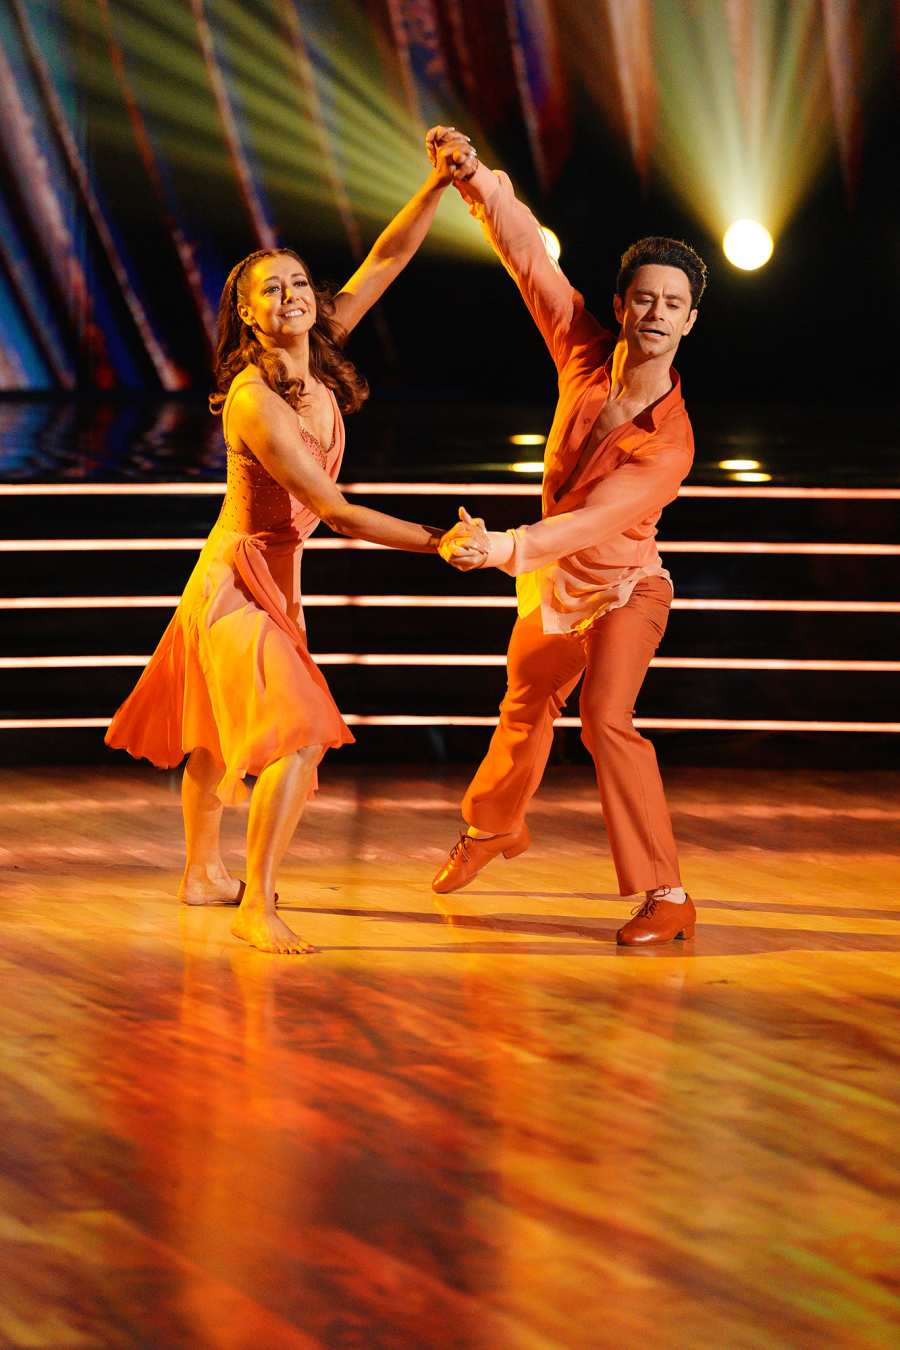 Alyson Hannigan and Sasha Farber Dancing With the Stars Pays Tribute to Whitney Houston See Who Was Eliminated